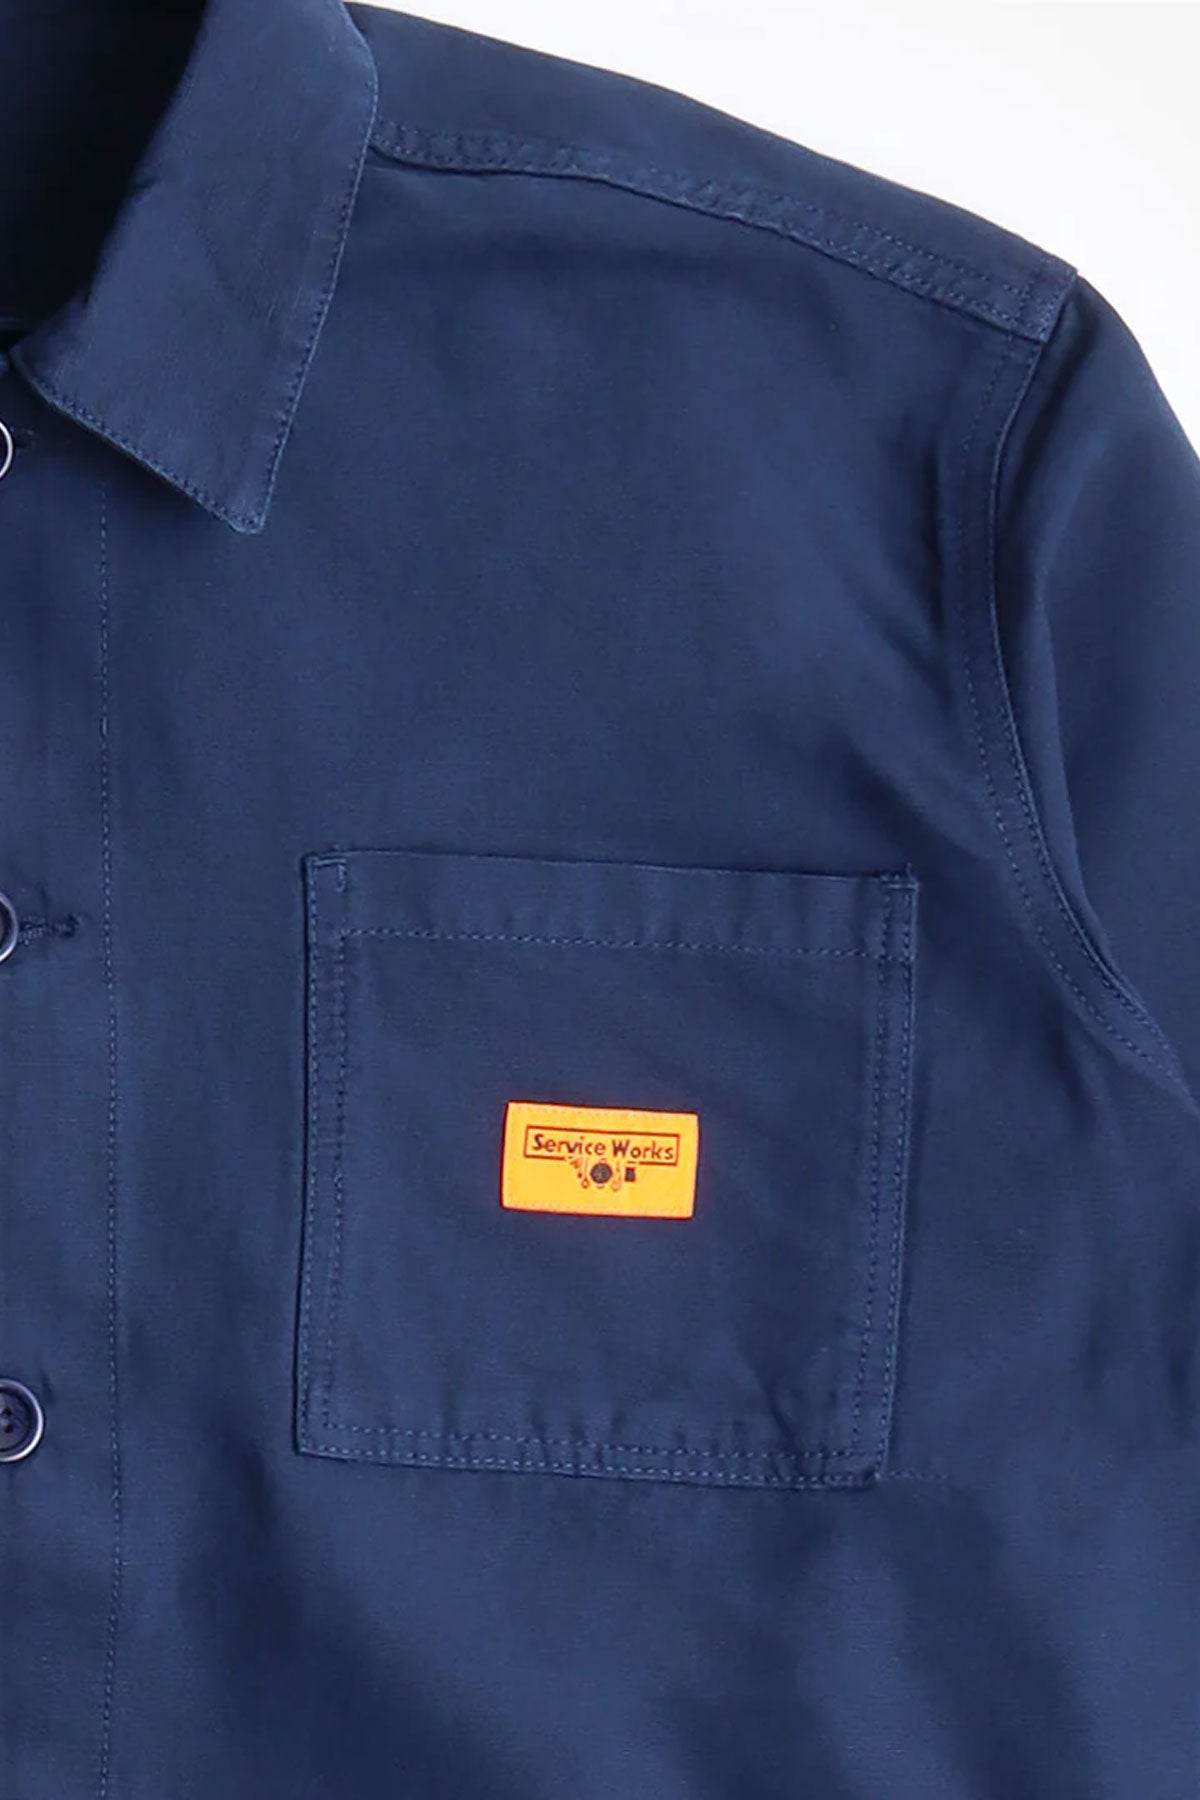 Service Works - Classic Coverall Jacket  in Navy